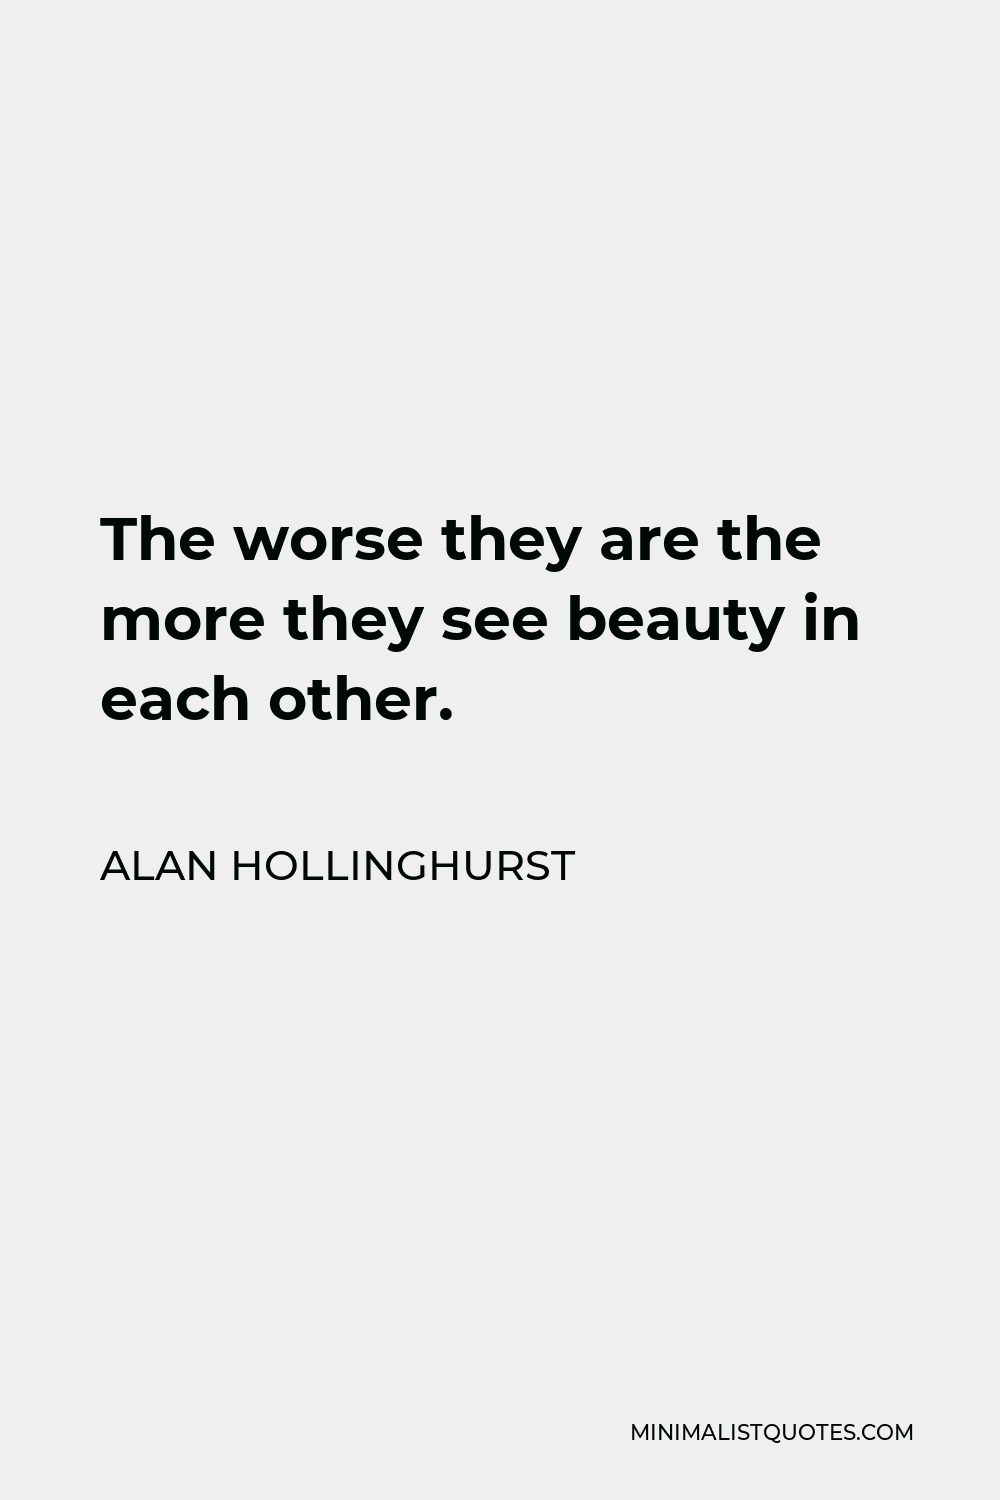 Alan Hollinghurst Quote - The worse they are the more they see beauty in each other.